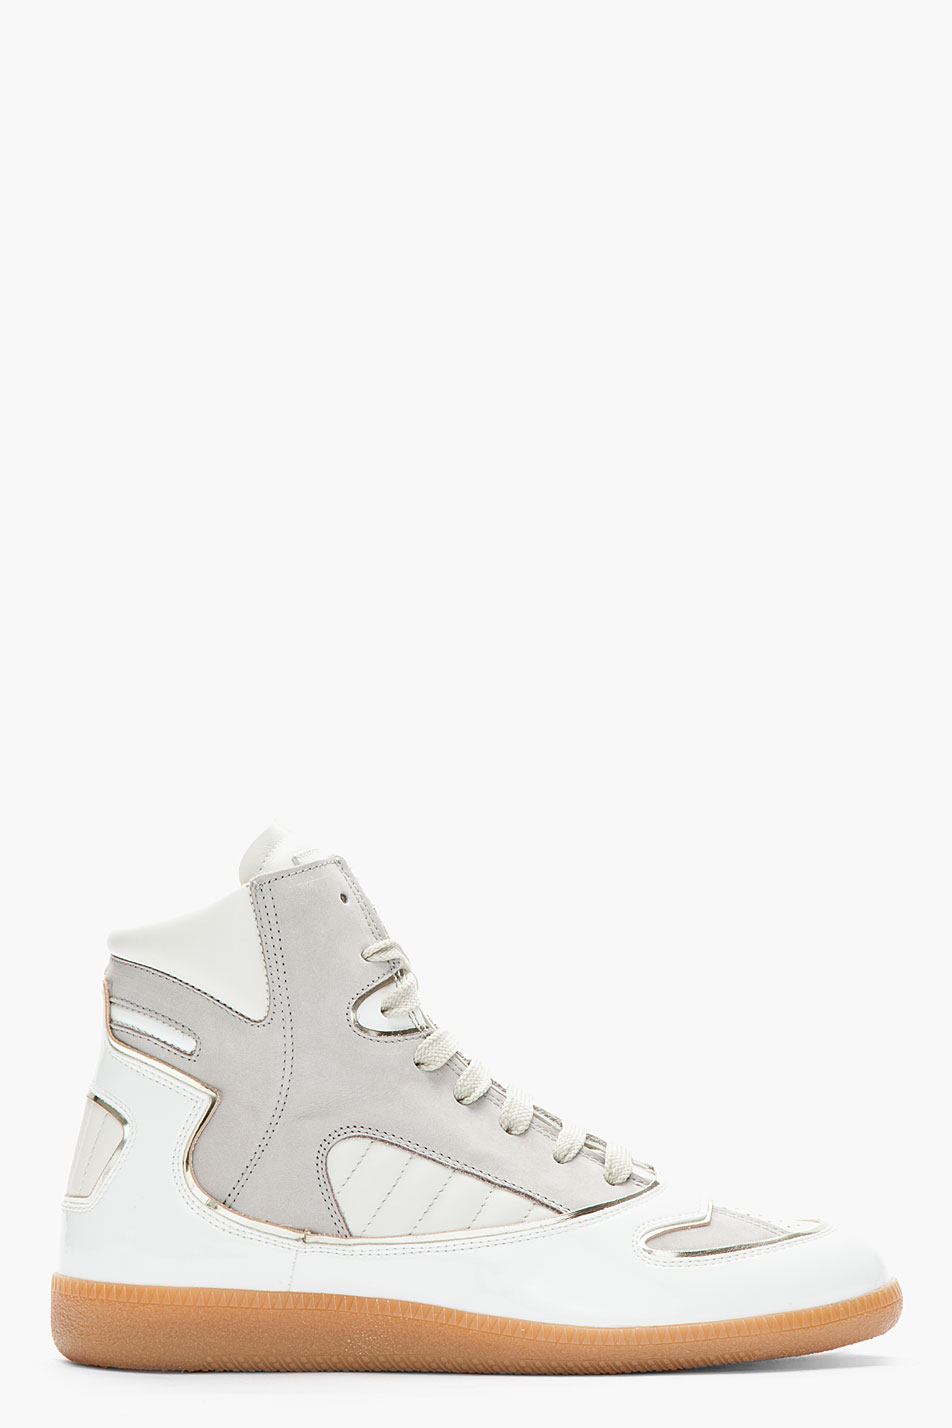 Maison Margiela White Grey Leather Cadillac Sneakers in White for Men ...